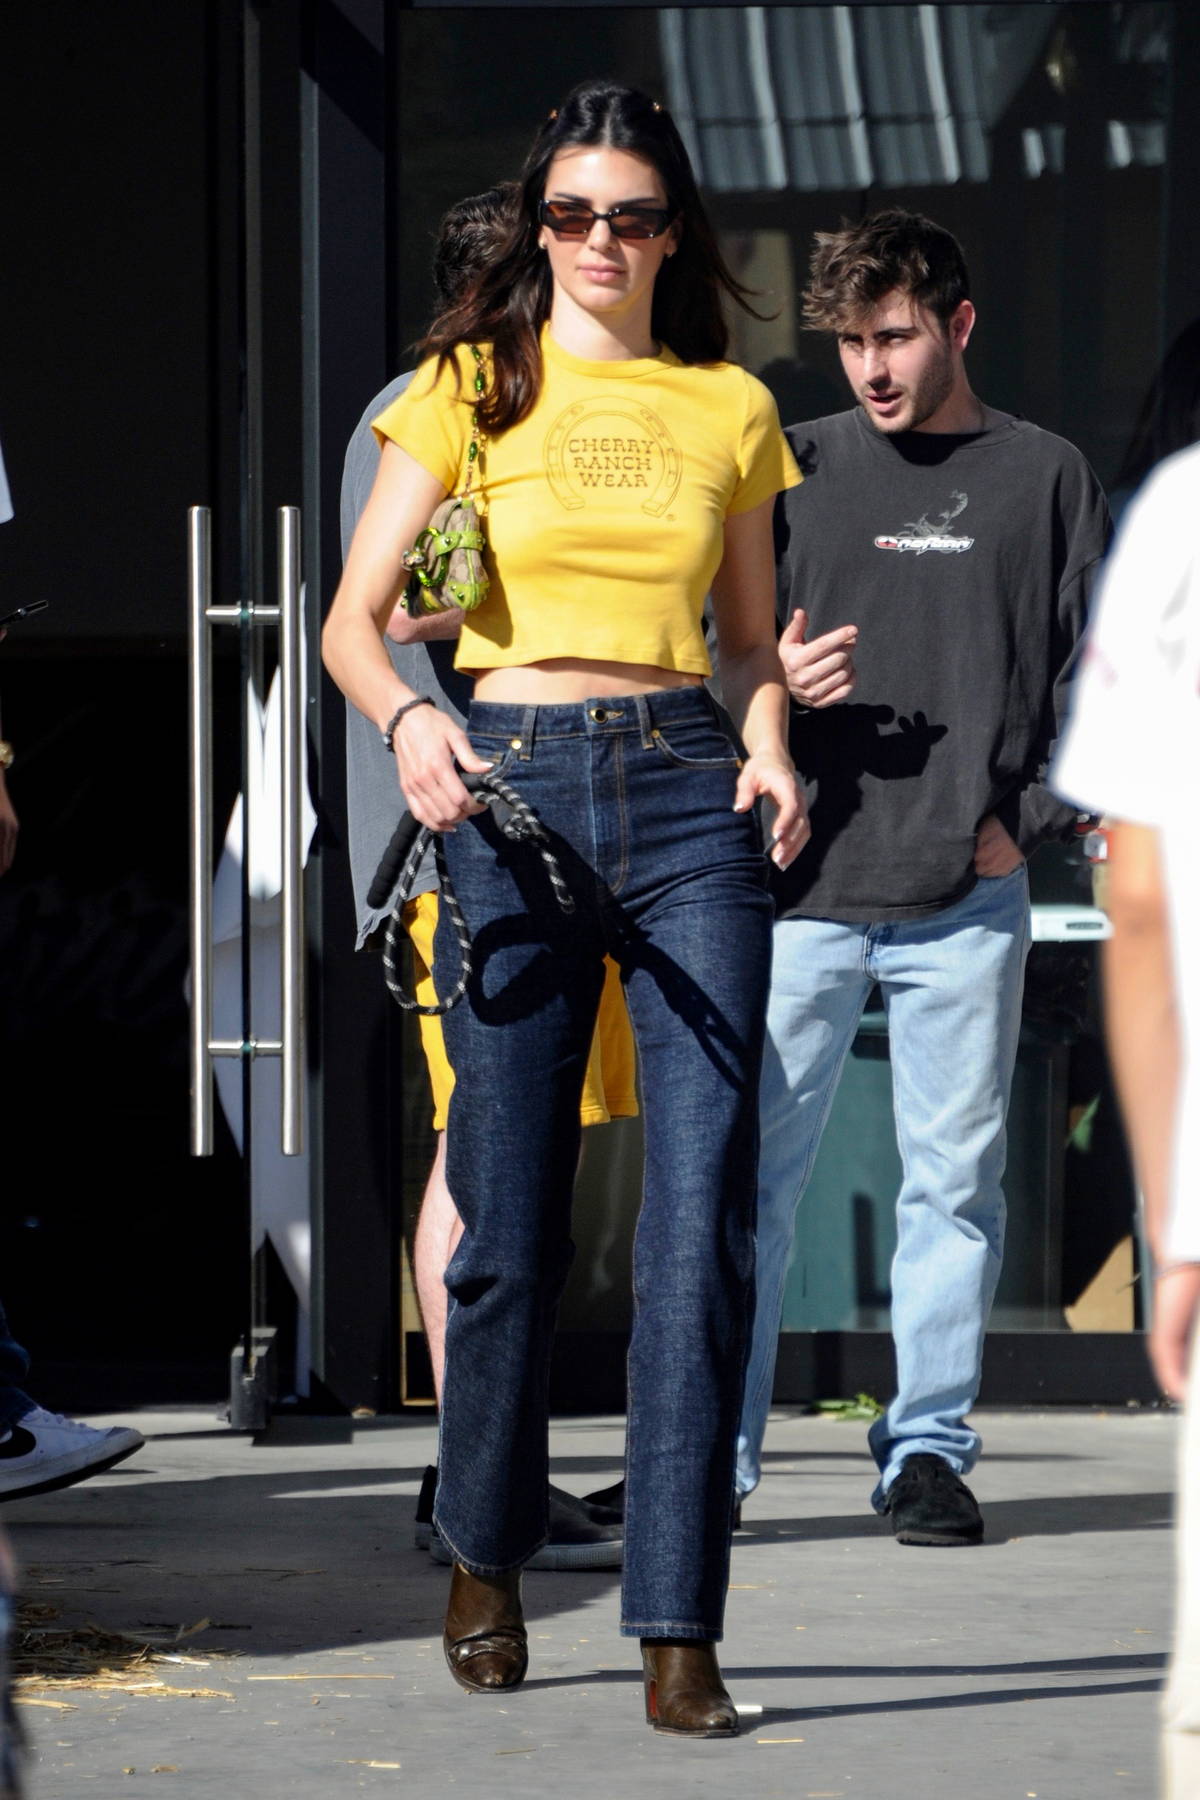 https://www.celebsfirst.com/wp-content/uploads/2022/02/kendall-jenner-looks-cute-in-a-yellow-crop-top-and-jeans-while-spotted-on-the-set-of-a-photoshoot-in-los-angeles-070222_3.jpg